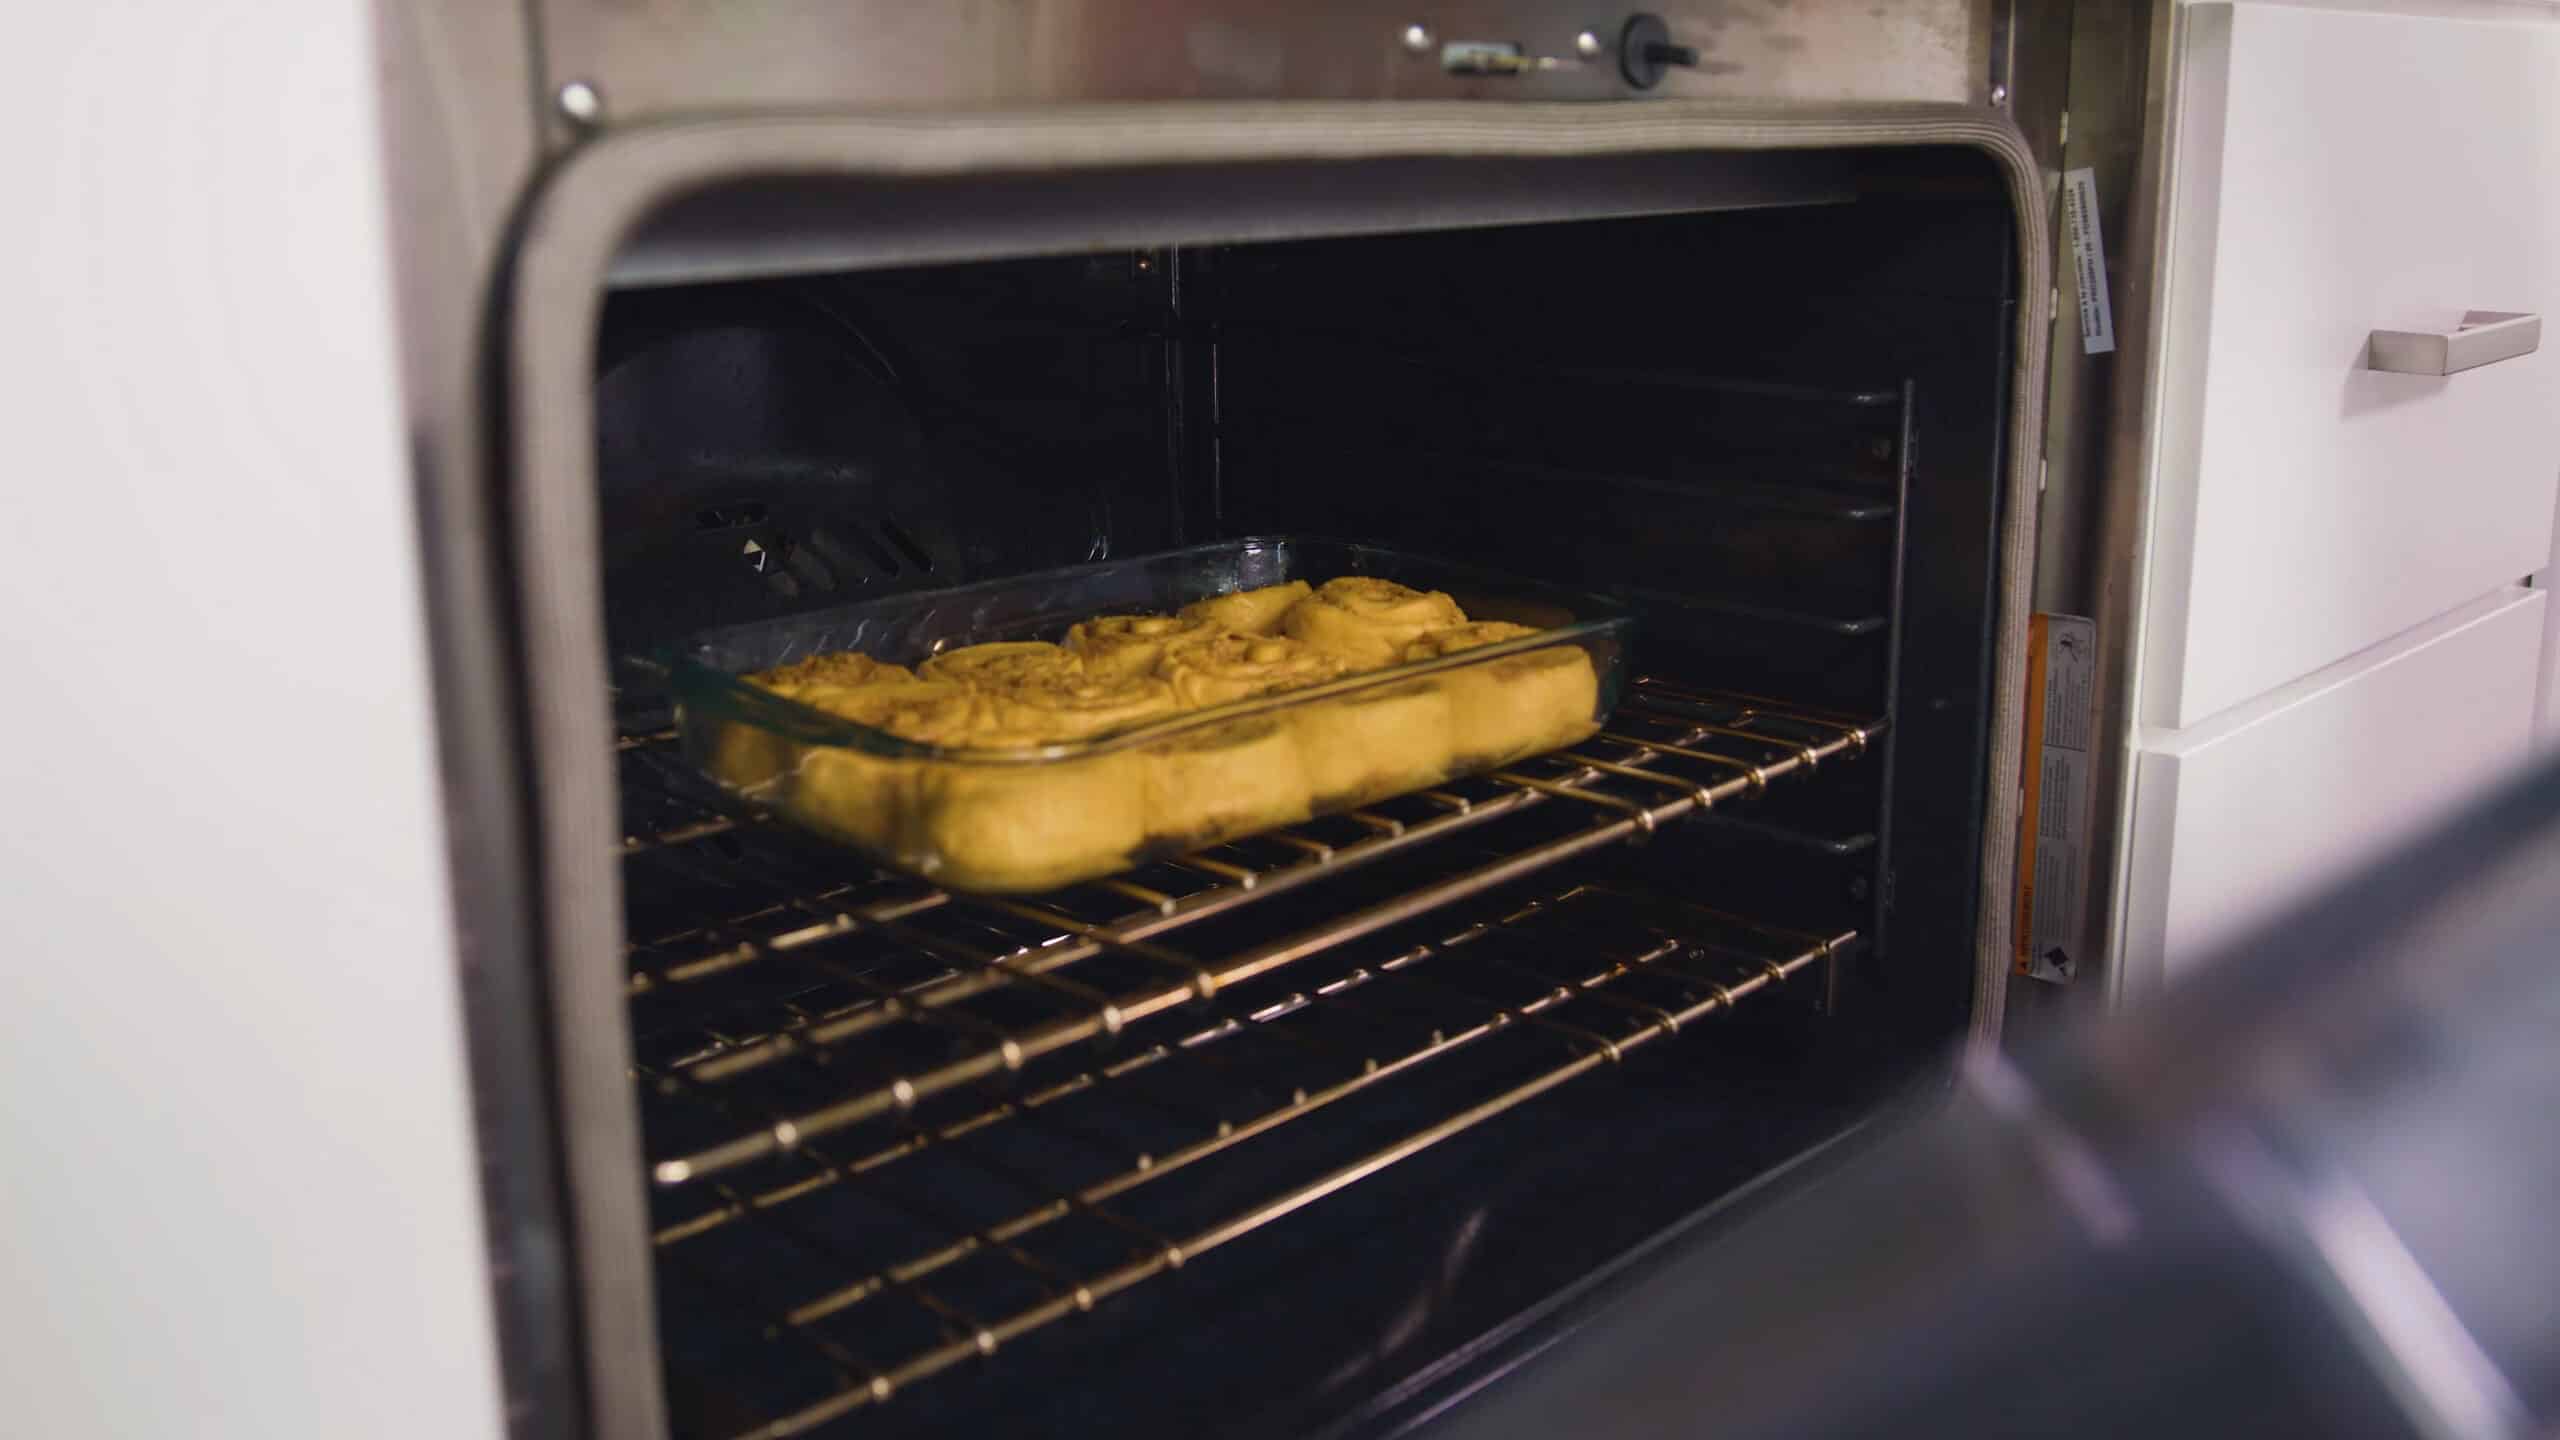 Angled view of open oven with a clear glass baking dish filled with one dozen pumpkin cinnamon rolls ready for baking on the rack in the middle of the oven.